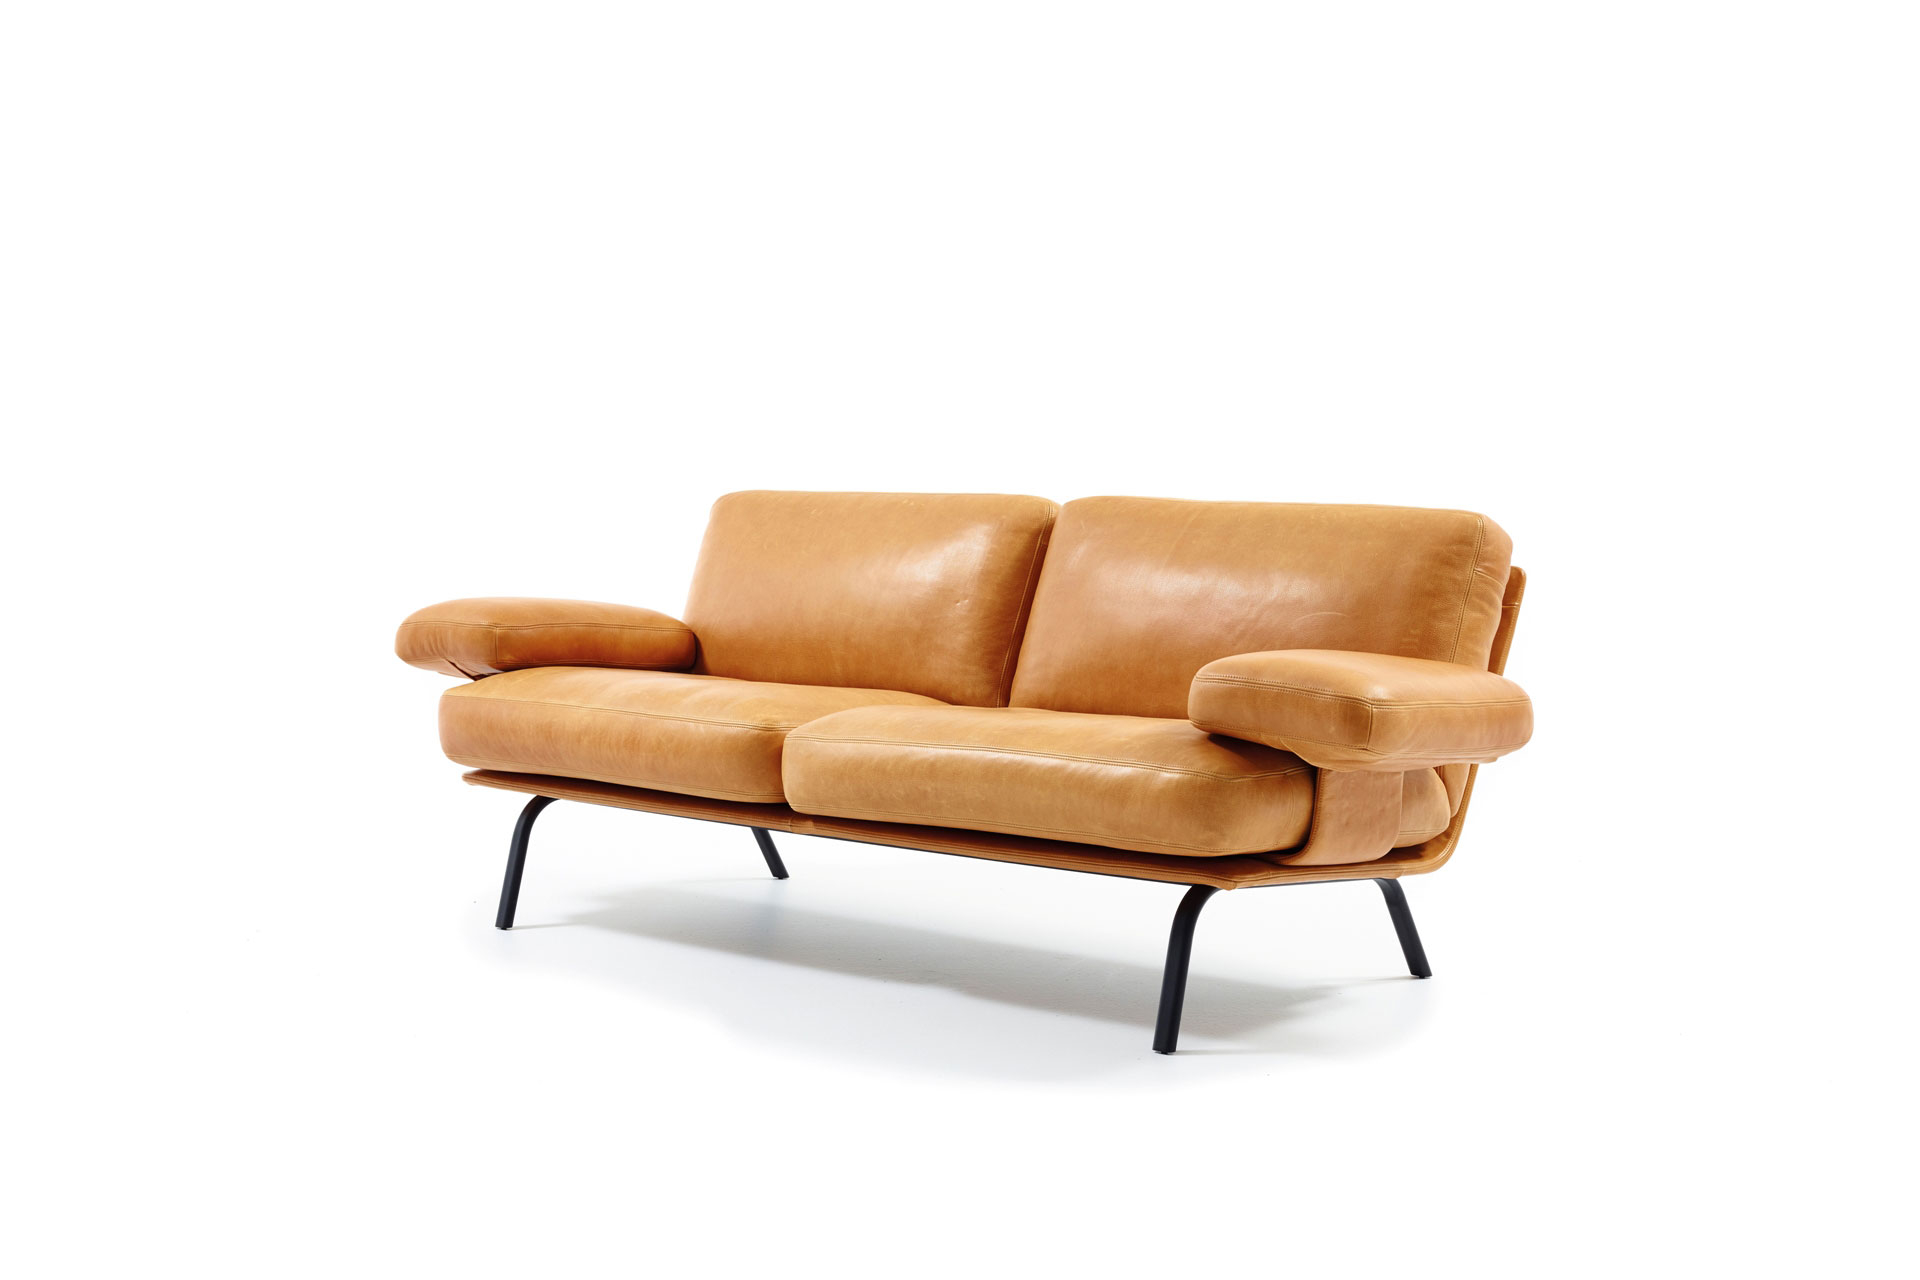 NEWPORT Sofa by Alain Monnens for Durlet